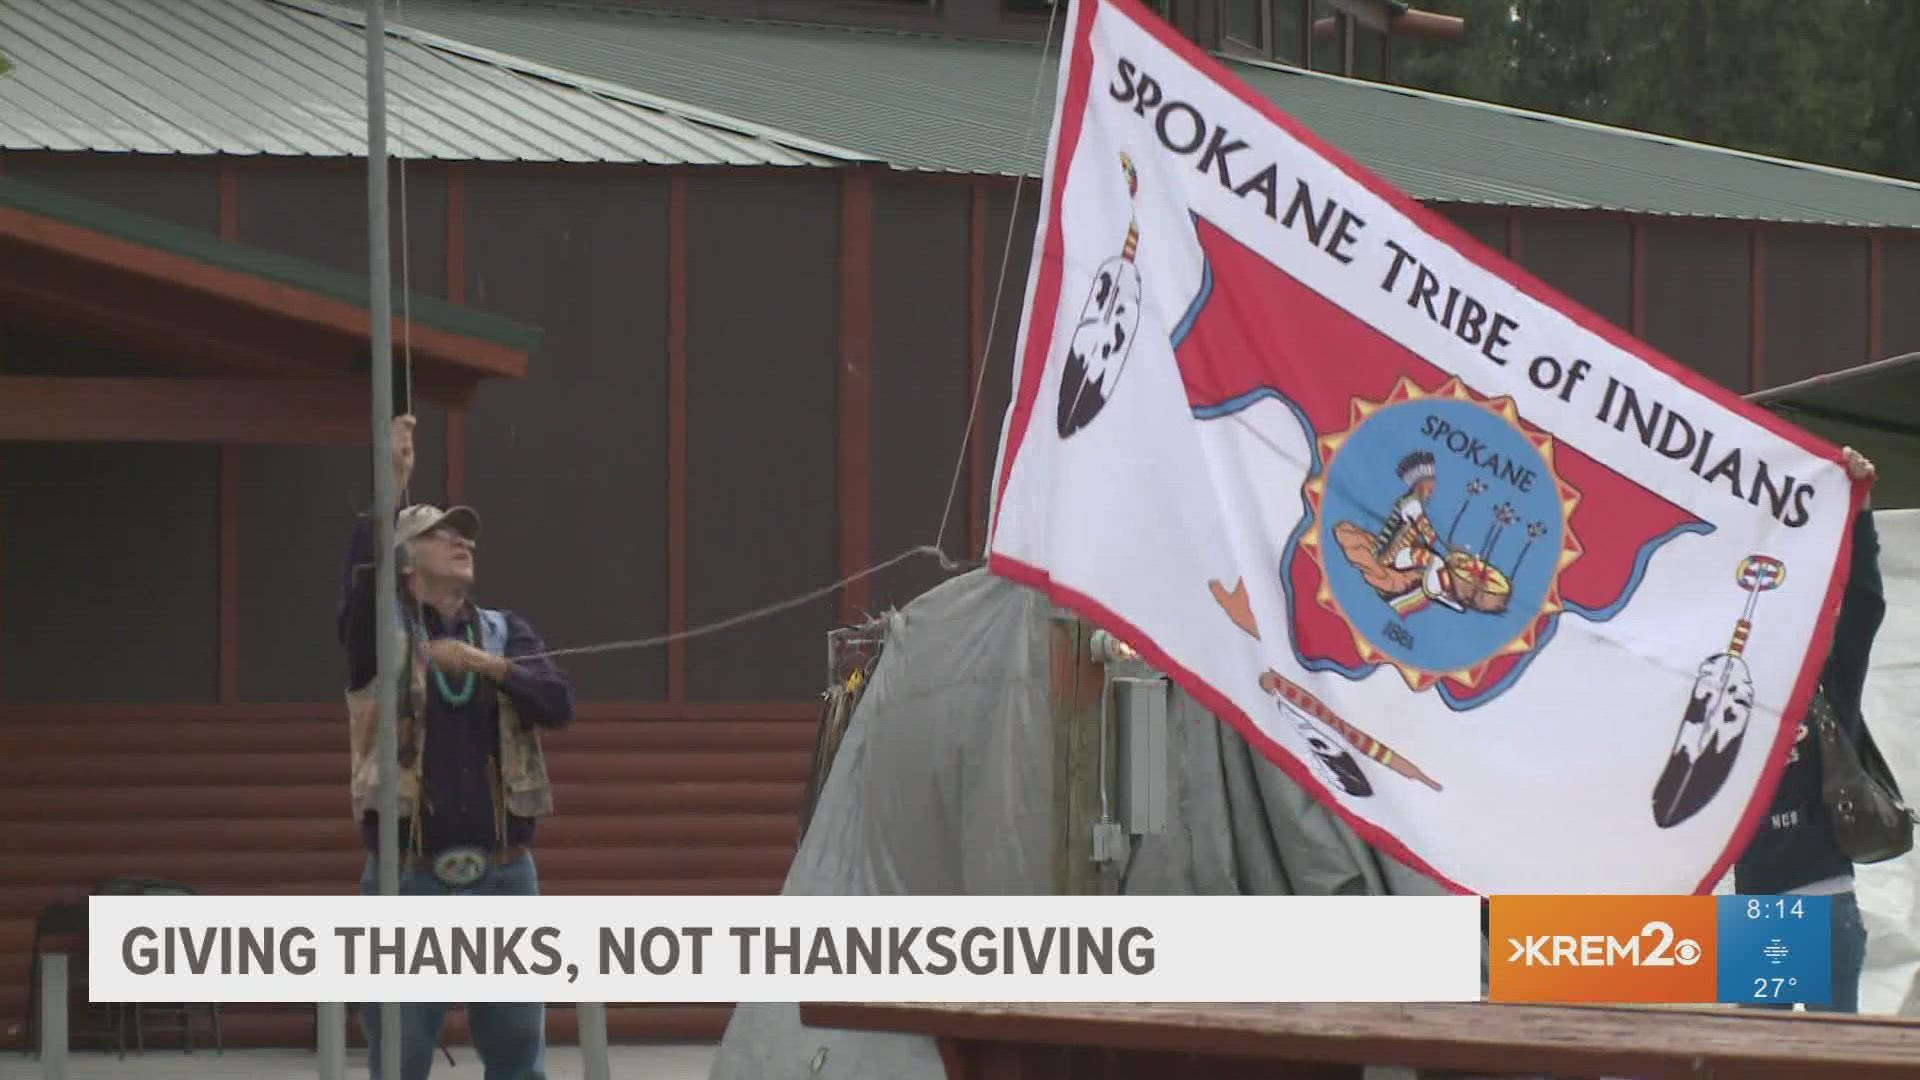 Monica Tonasket with the Spokane Tribe talks about her feeling about Thanksgiving.